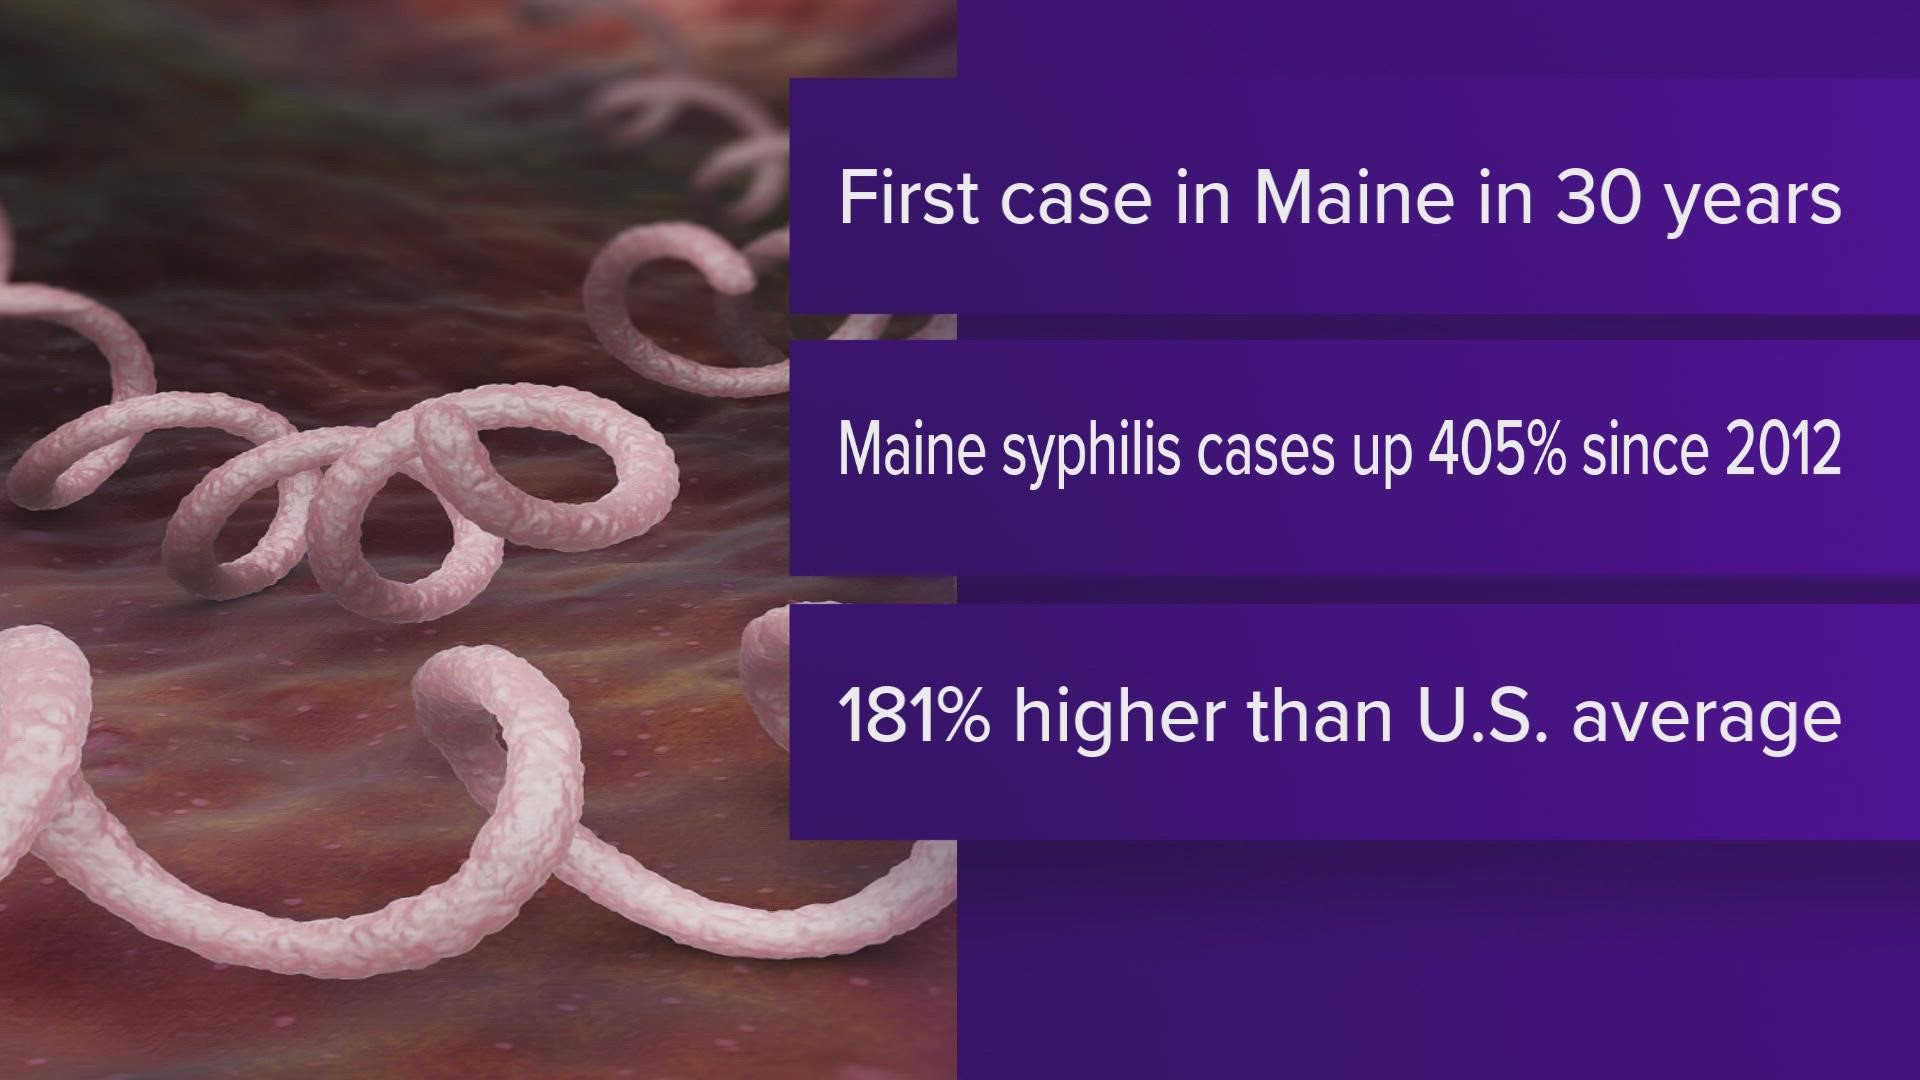 Syphilis rates have been on the rise in Maine since 2012. During that time, cases went up by 405%, which is close to 200% higher than national average.